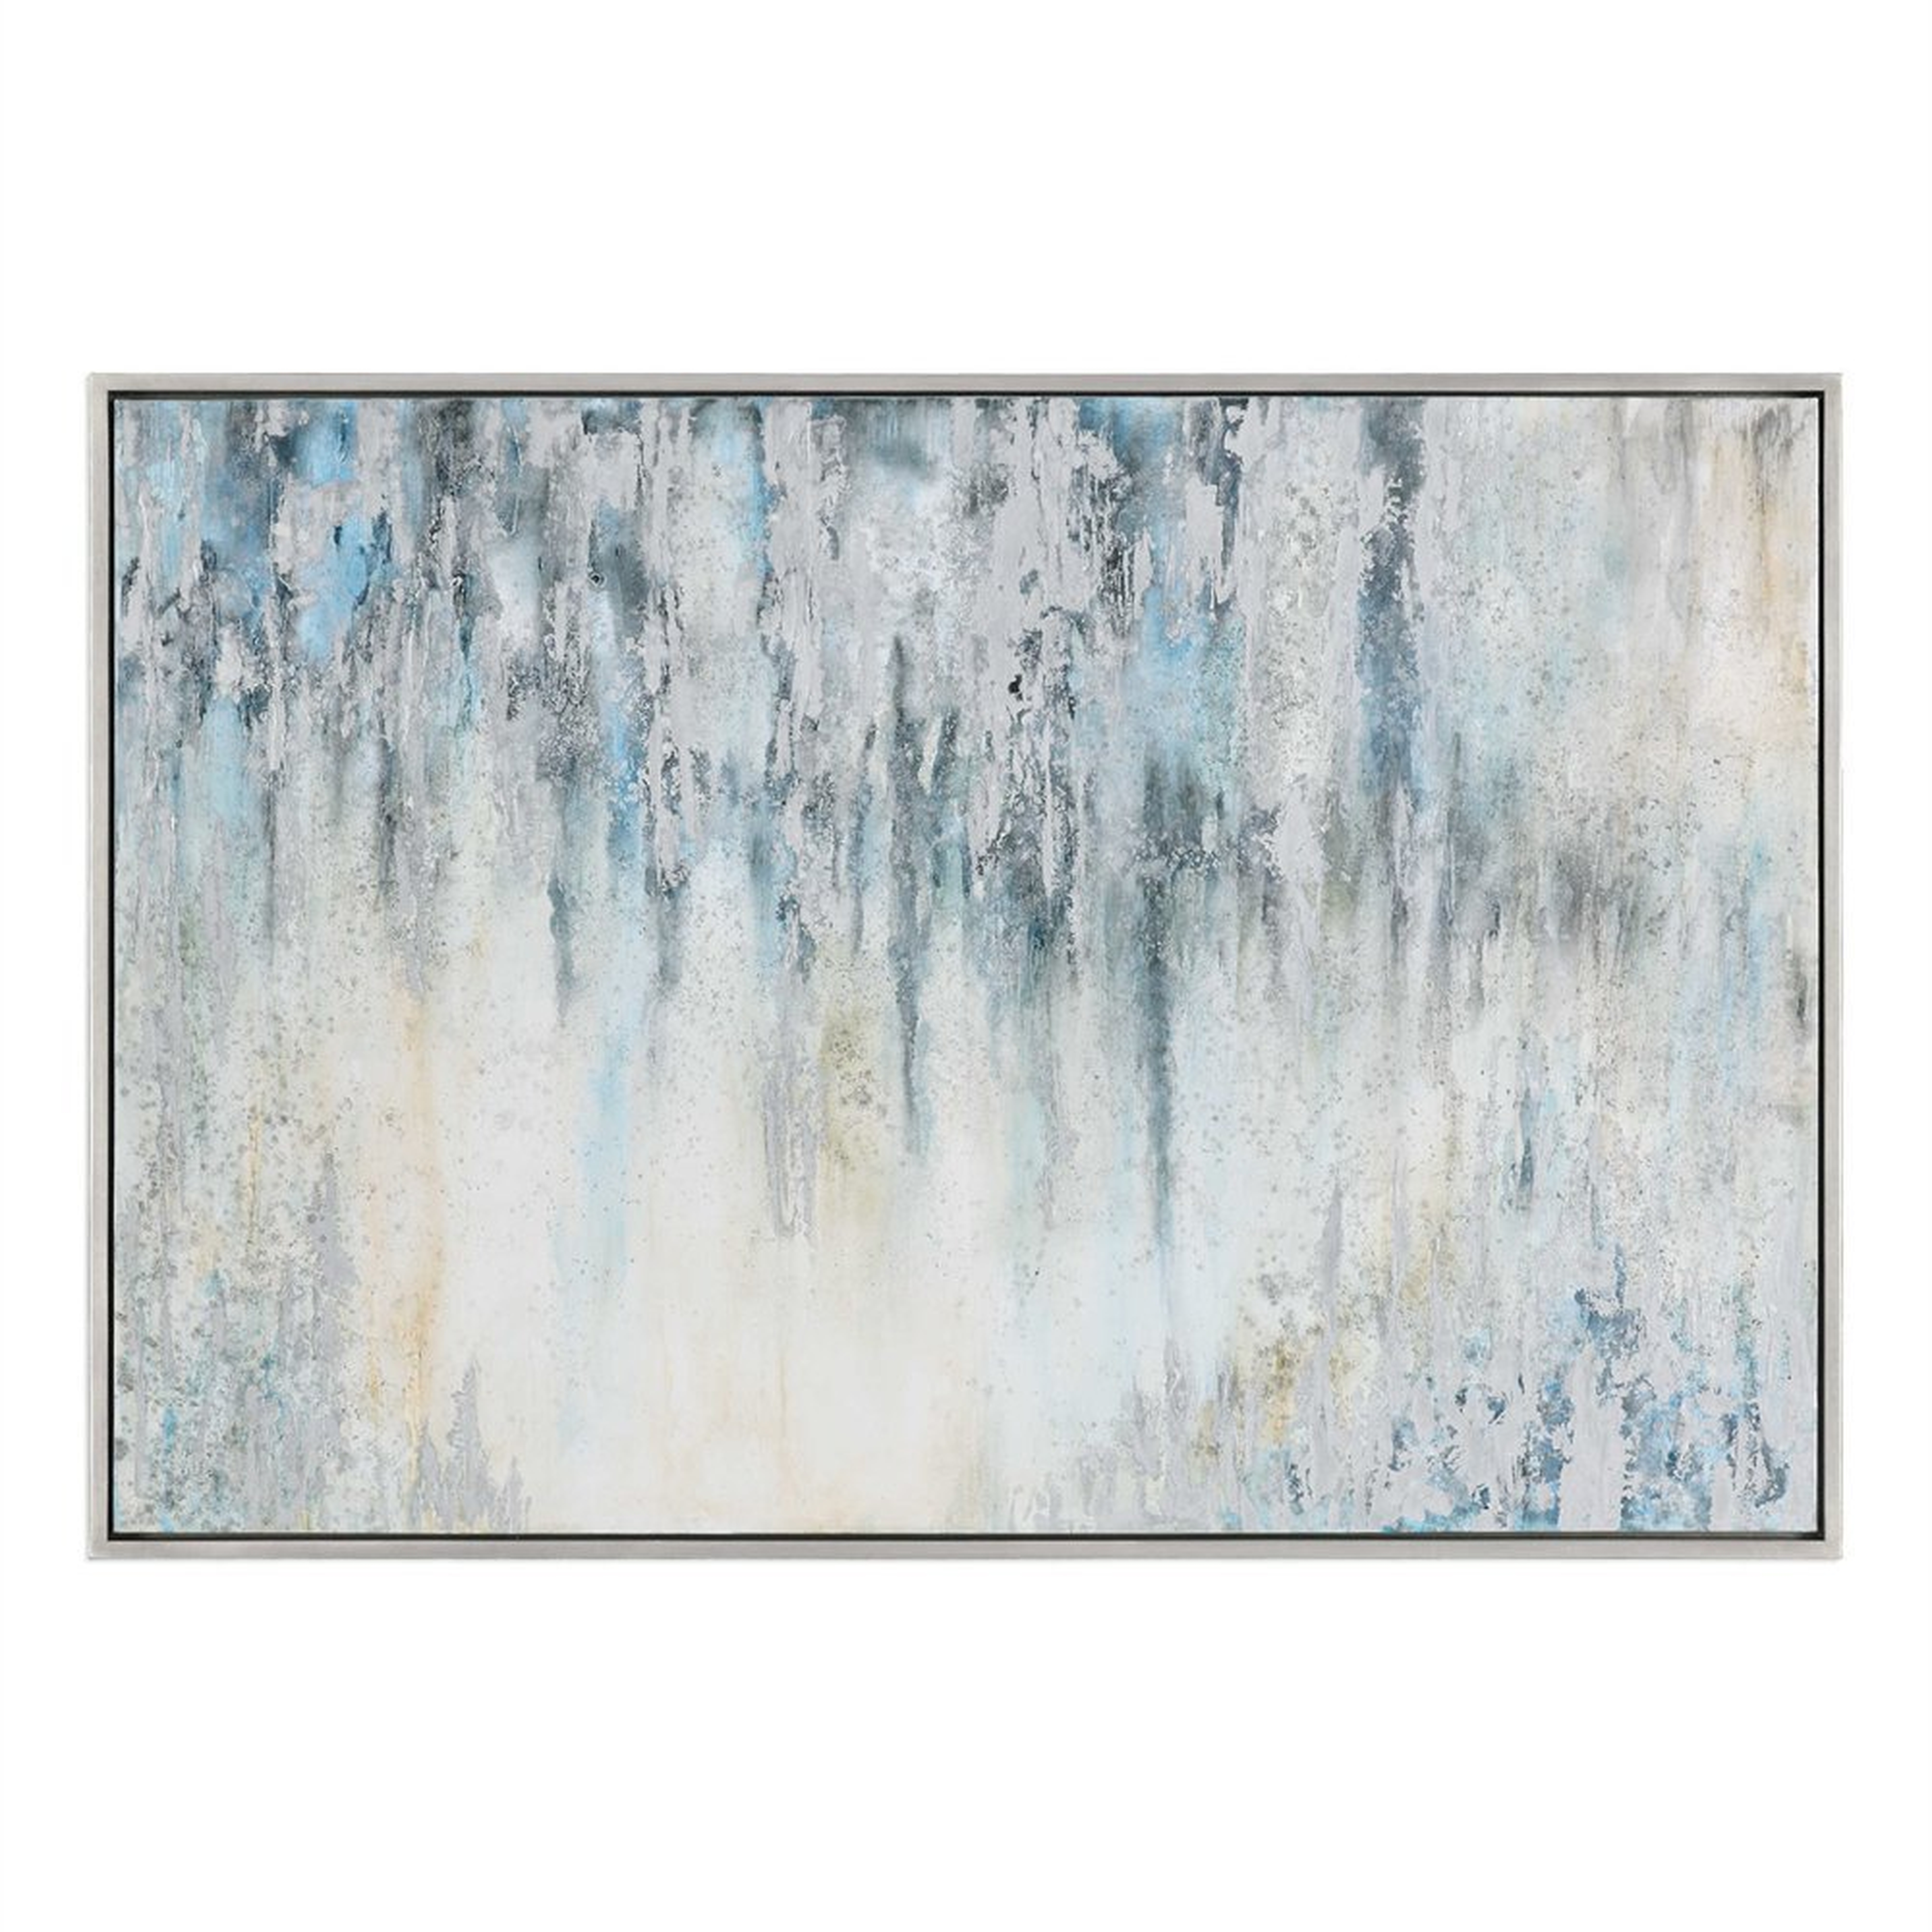 Overcast' Graphic Art Print on Canvas, 61" x 42" - Hudsonhill Foundry